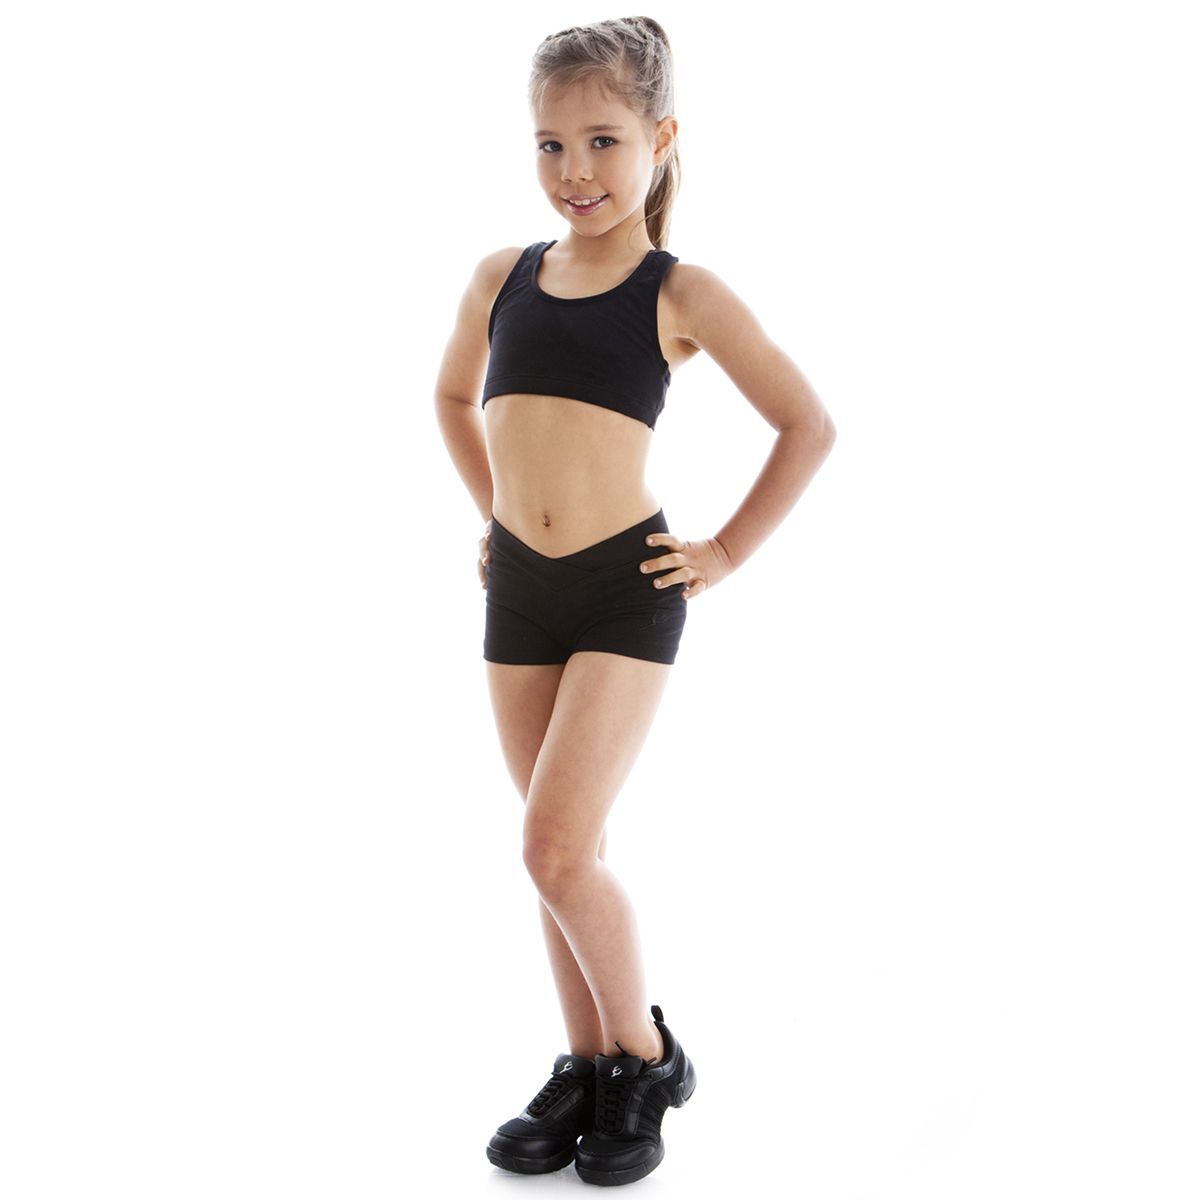 Choomomo Kids Girls Two Pieces Dance Outfit Criss Cross Back Crop Top with Booty Shorts Swimwear 